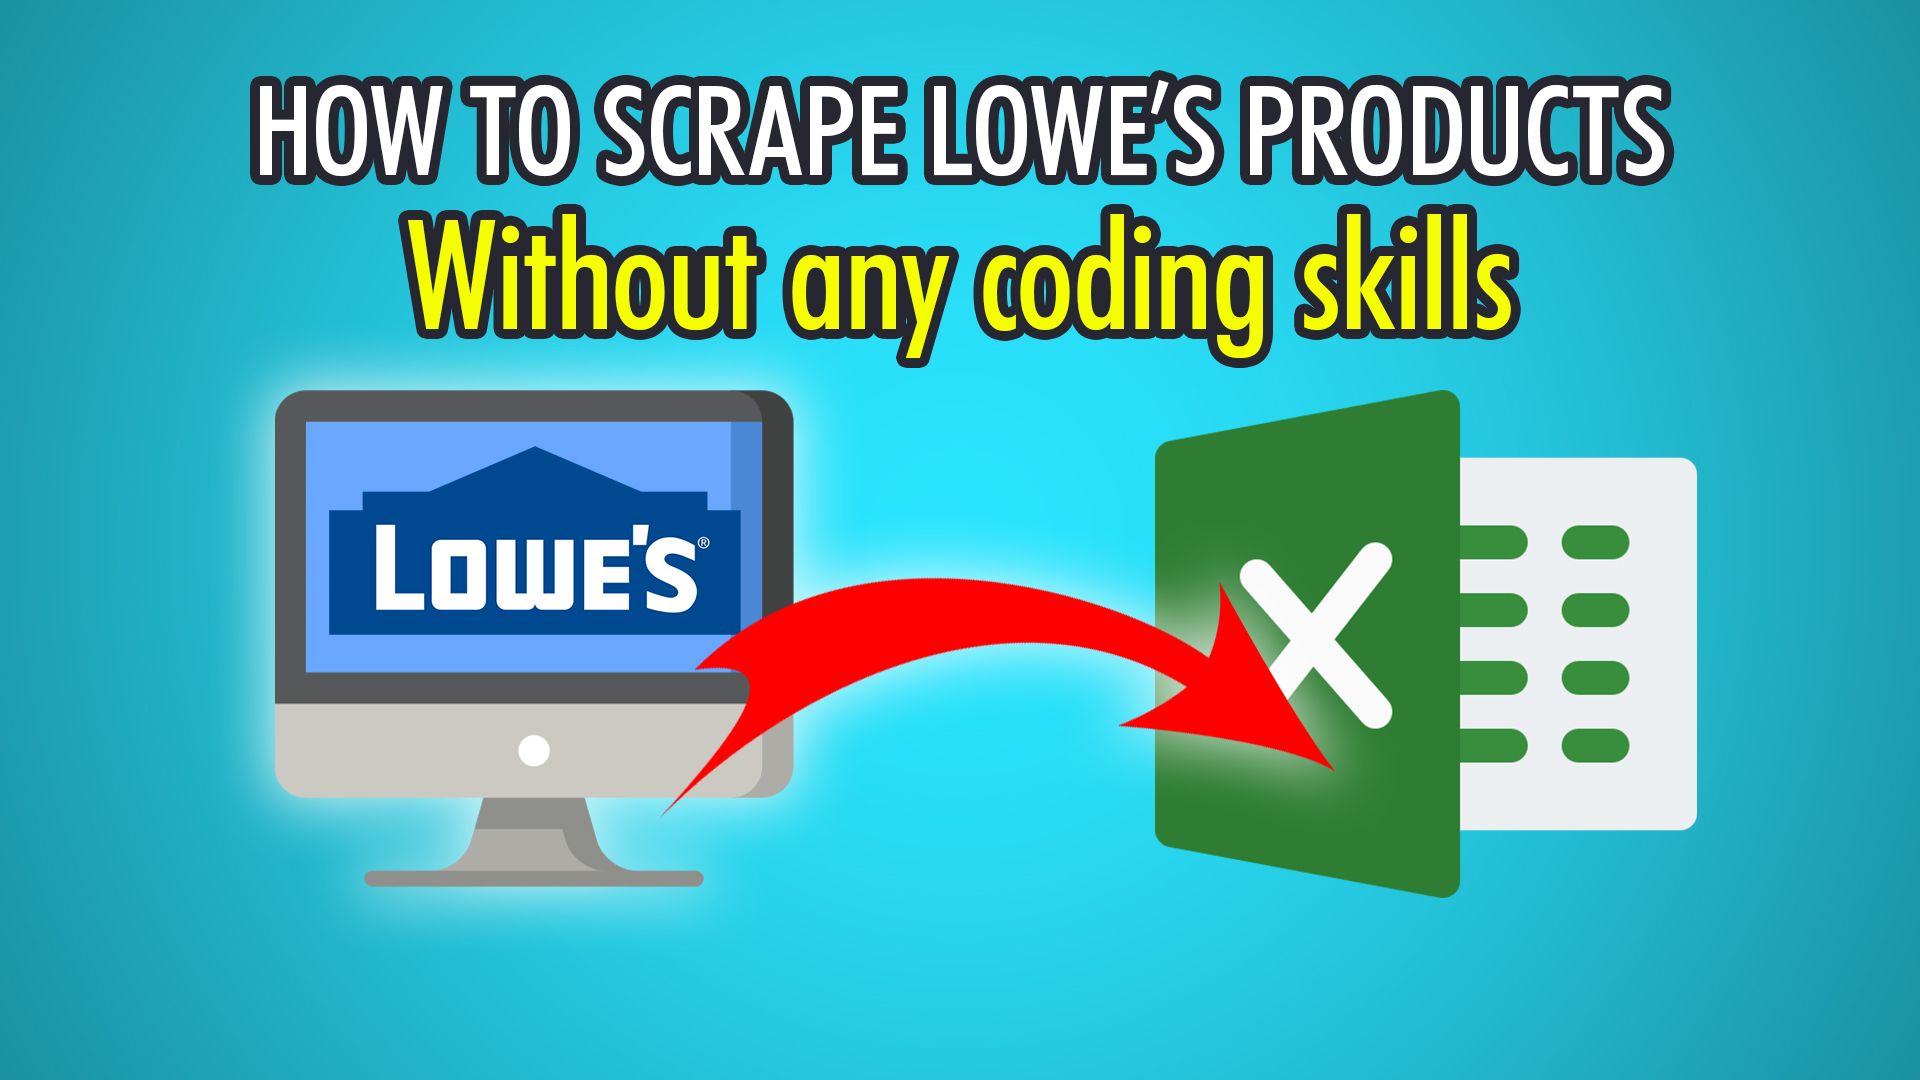 How to Scrape Lowe’s Products